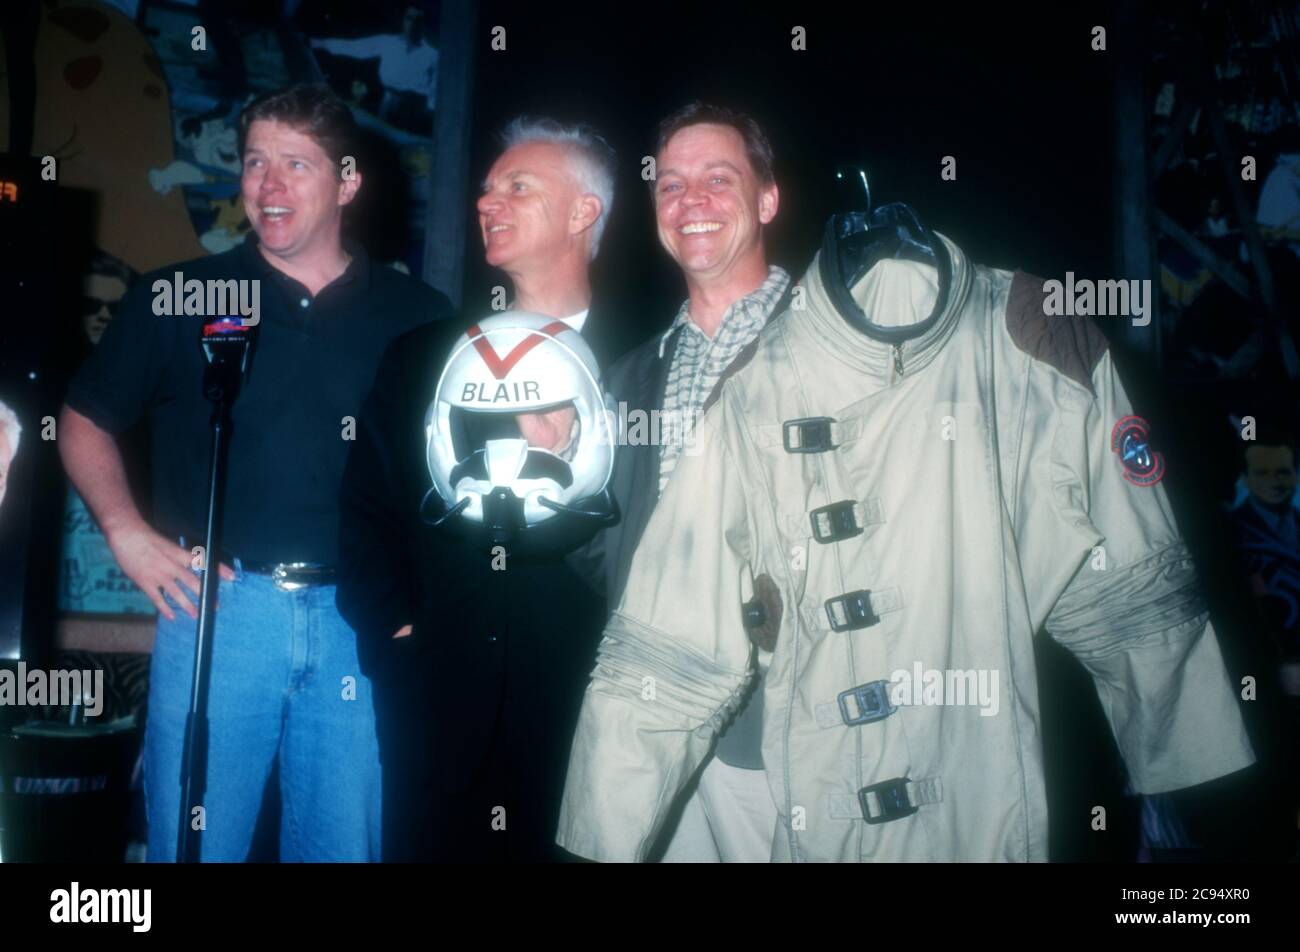 Los Angeles, California, USA 8th February 1996 (L-R) Actor Thomas F. Wilson, actor Malcolm McDowell and actor Mark Hamill attend Wings Commander 4 Costume Presentation on February 8, 1996 at Planet Hollywood in Los Angeles, California, USA. Photo by Barry King/Alamy Stock Photo Stock Photo